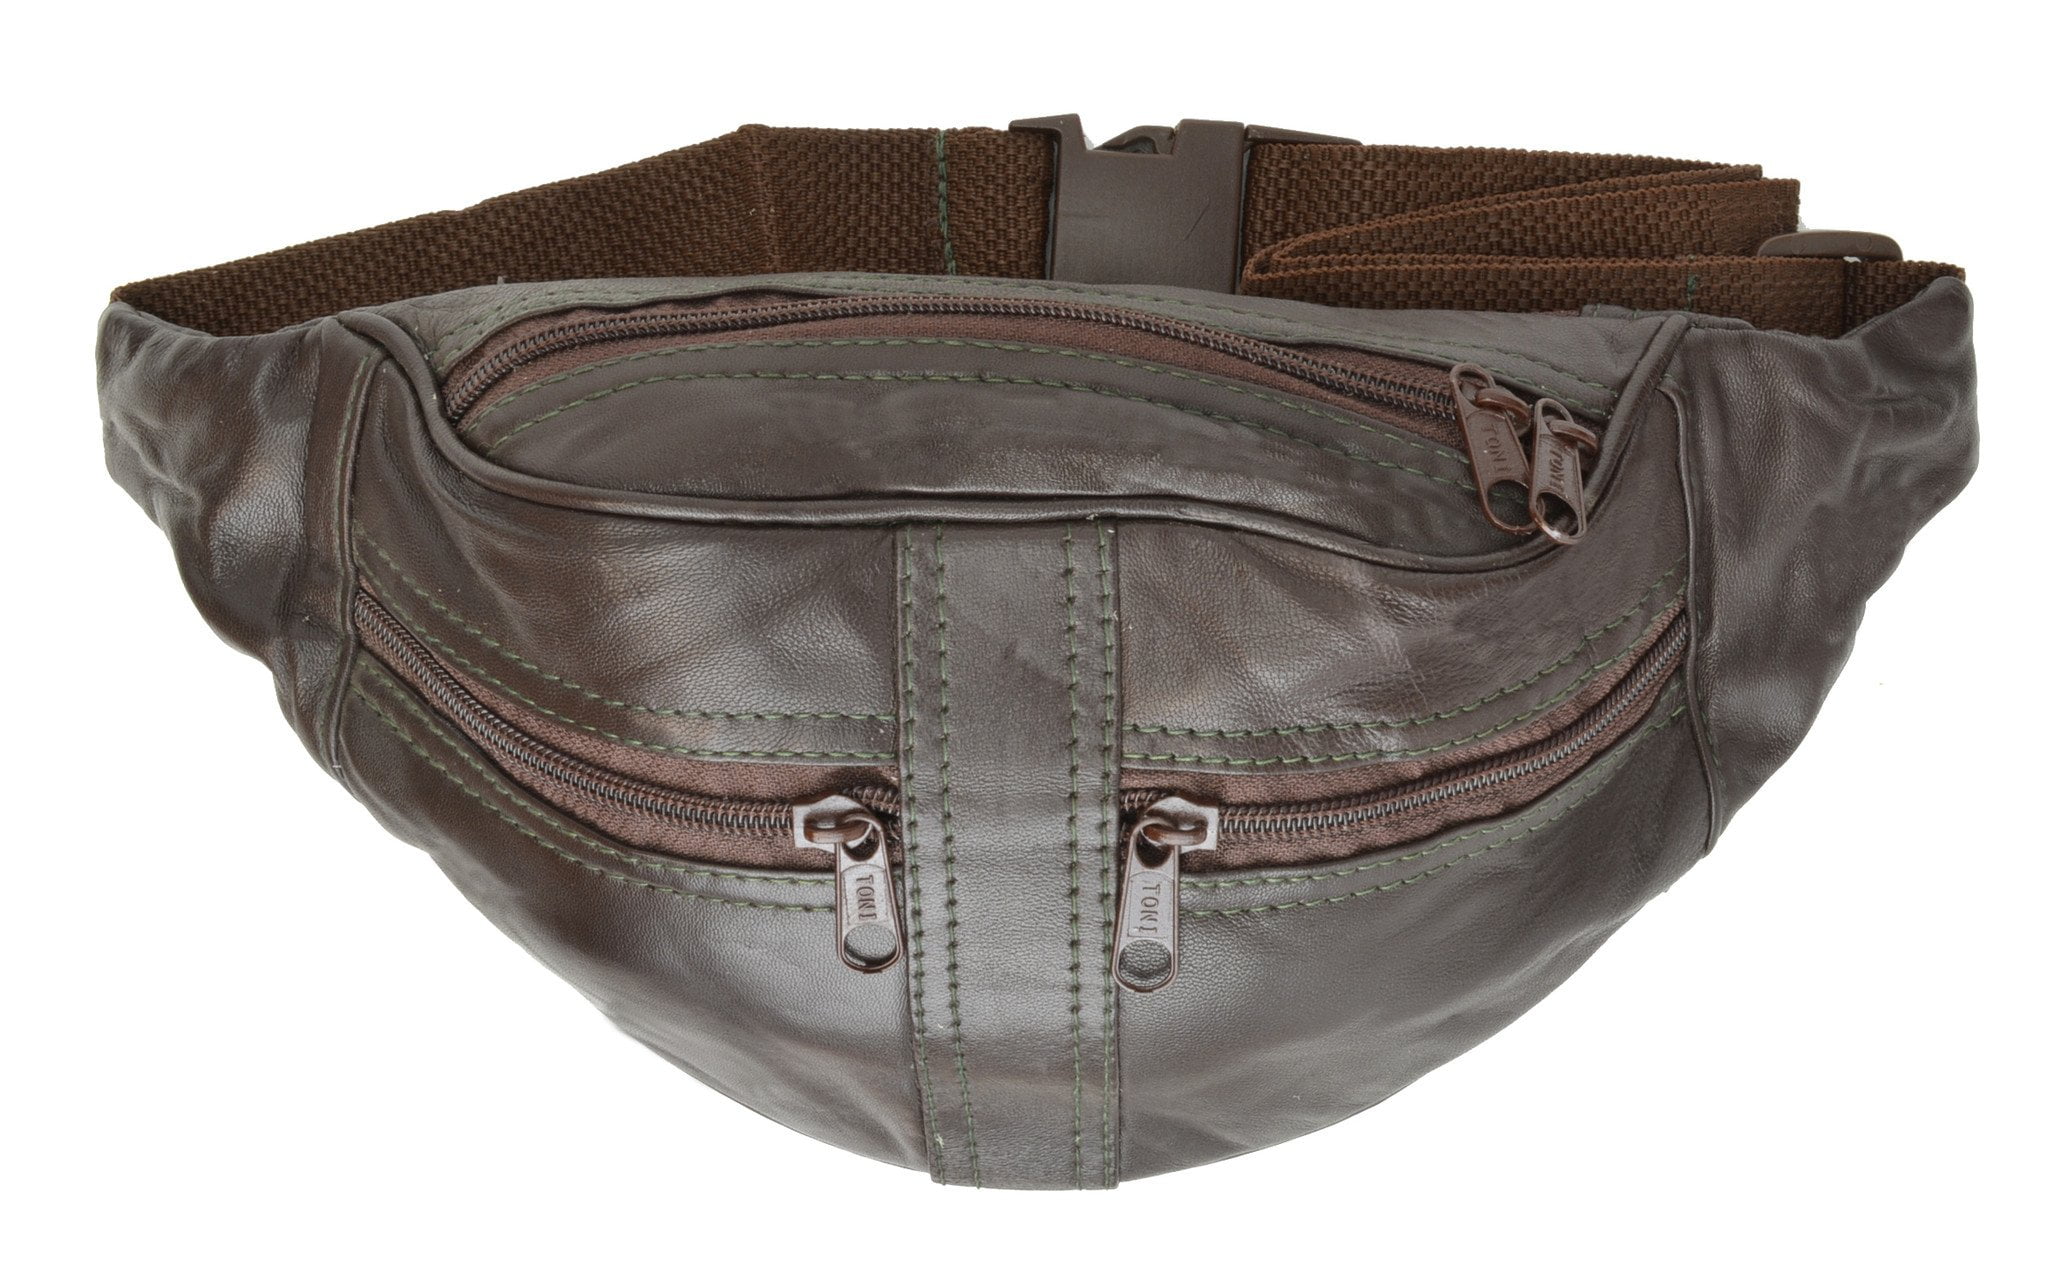 Leather Fanny Pack | Leather Fanny Packs, Waist Bags & Belt Bags ...